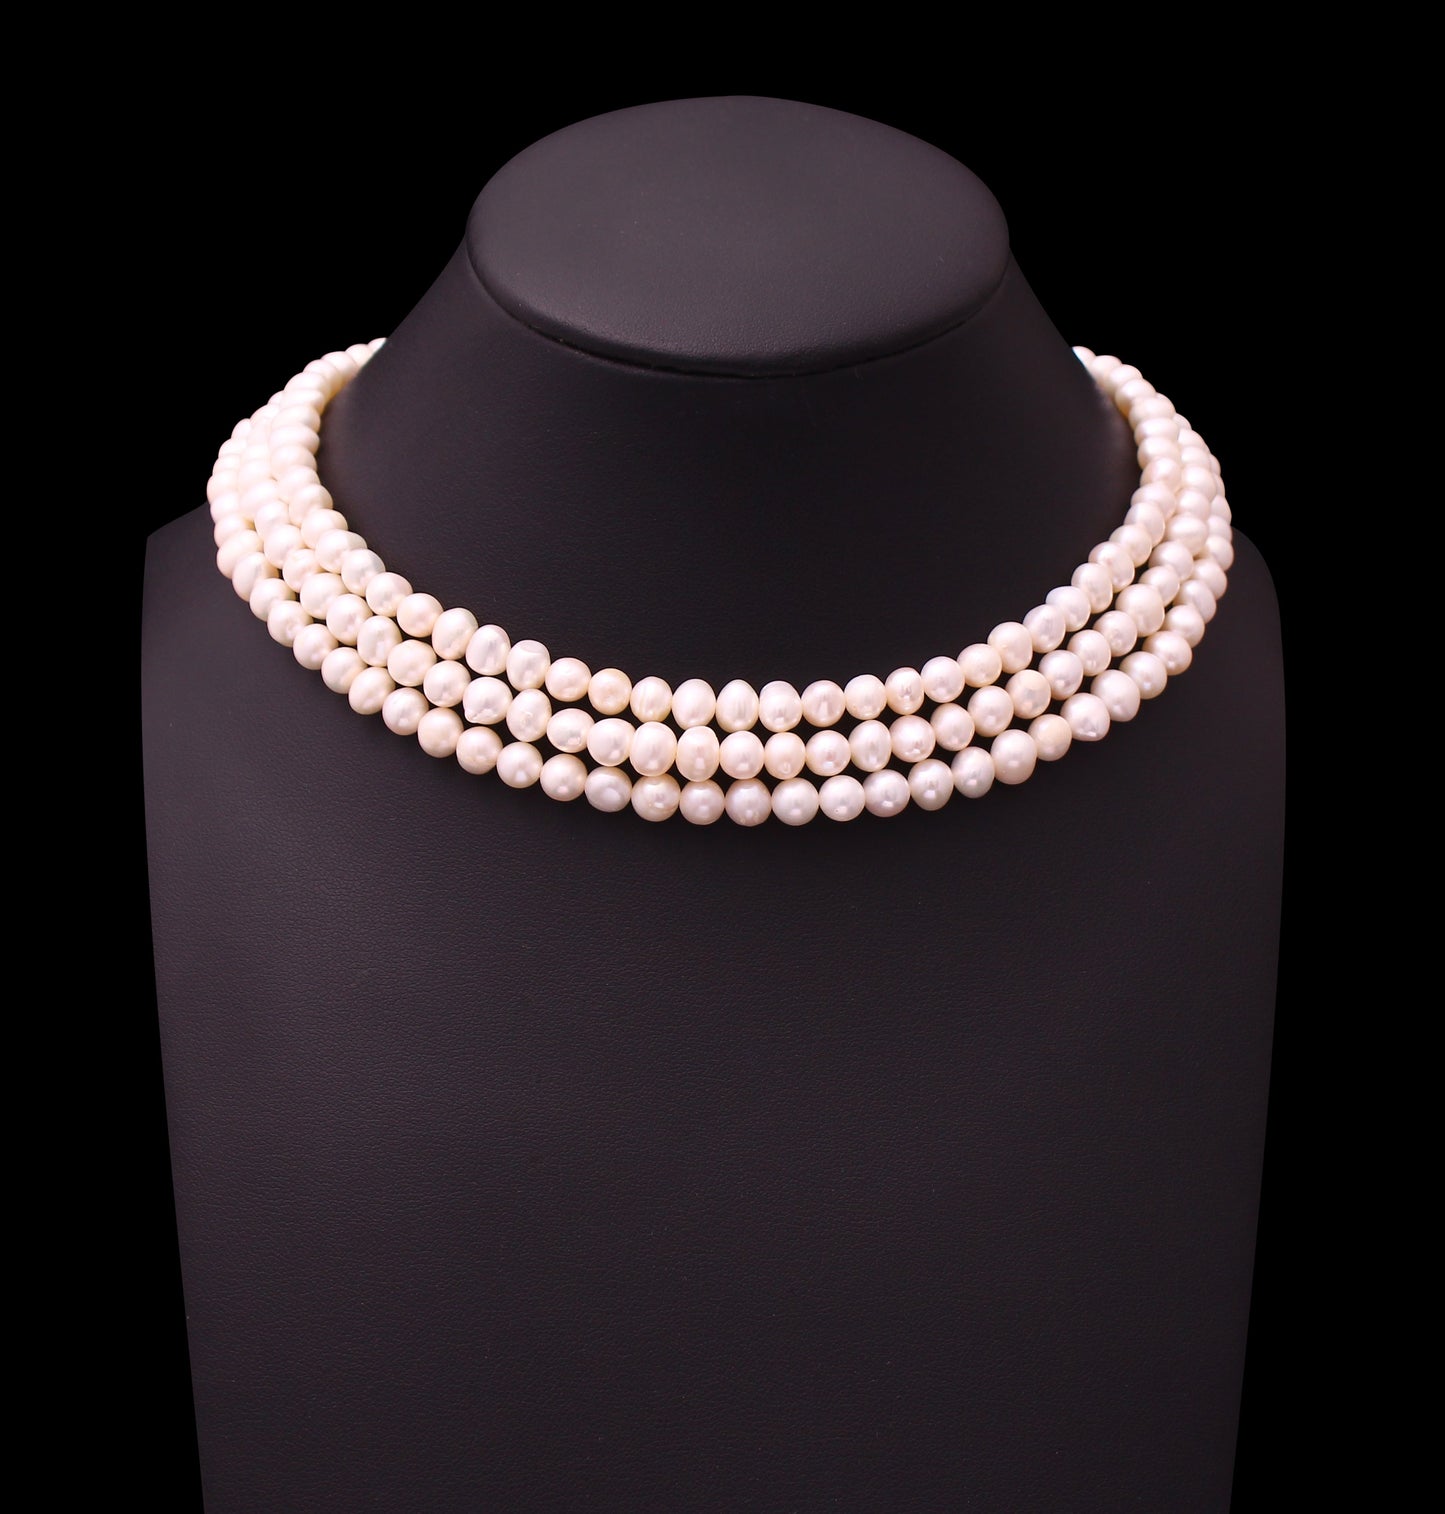 Natural freshwater Pearl 3 Layered Necklace - Timeless Jewelry For Her GemsRush